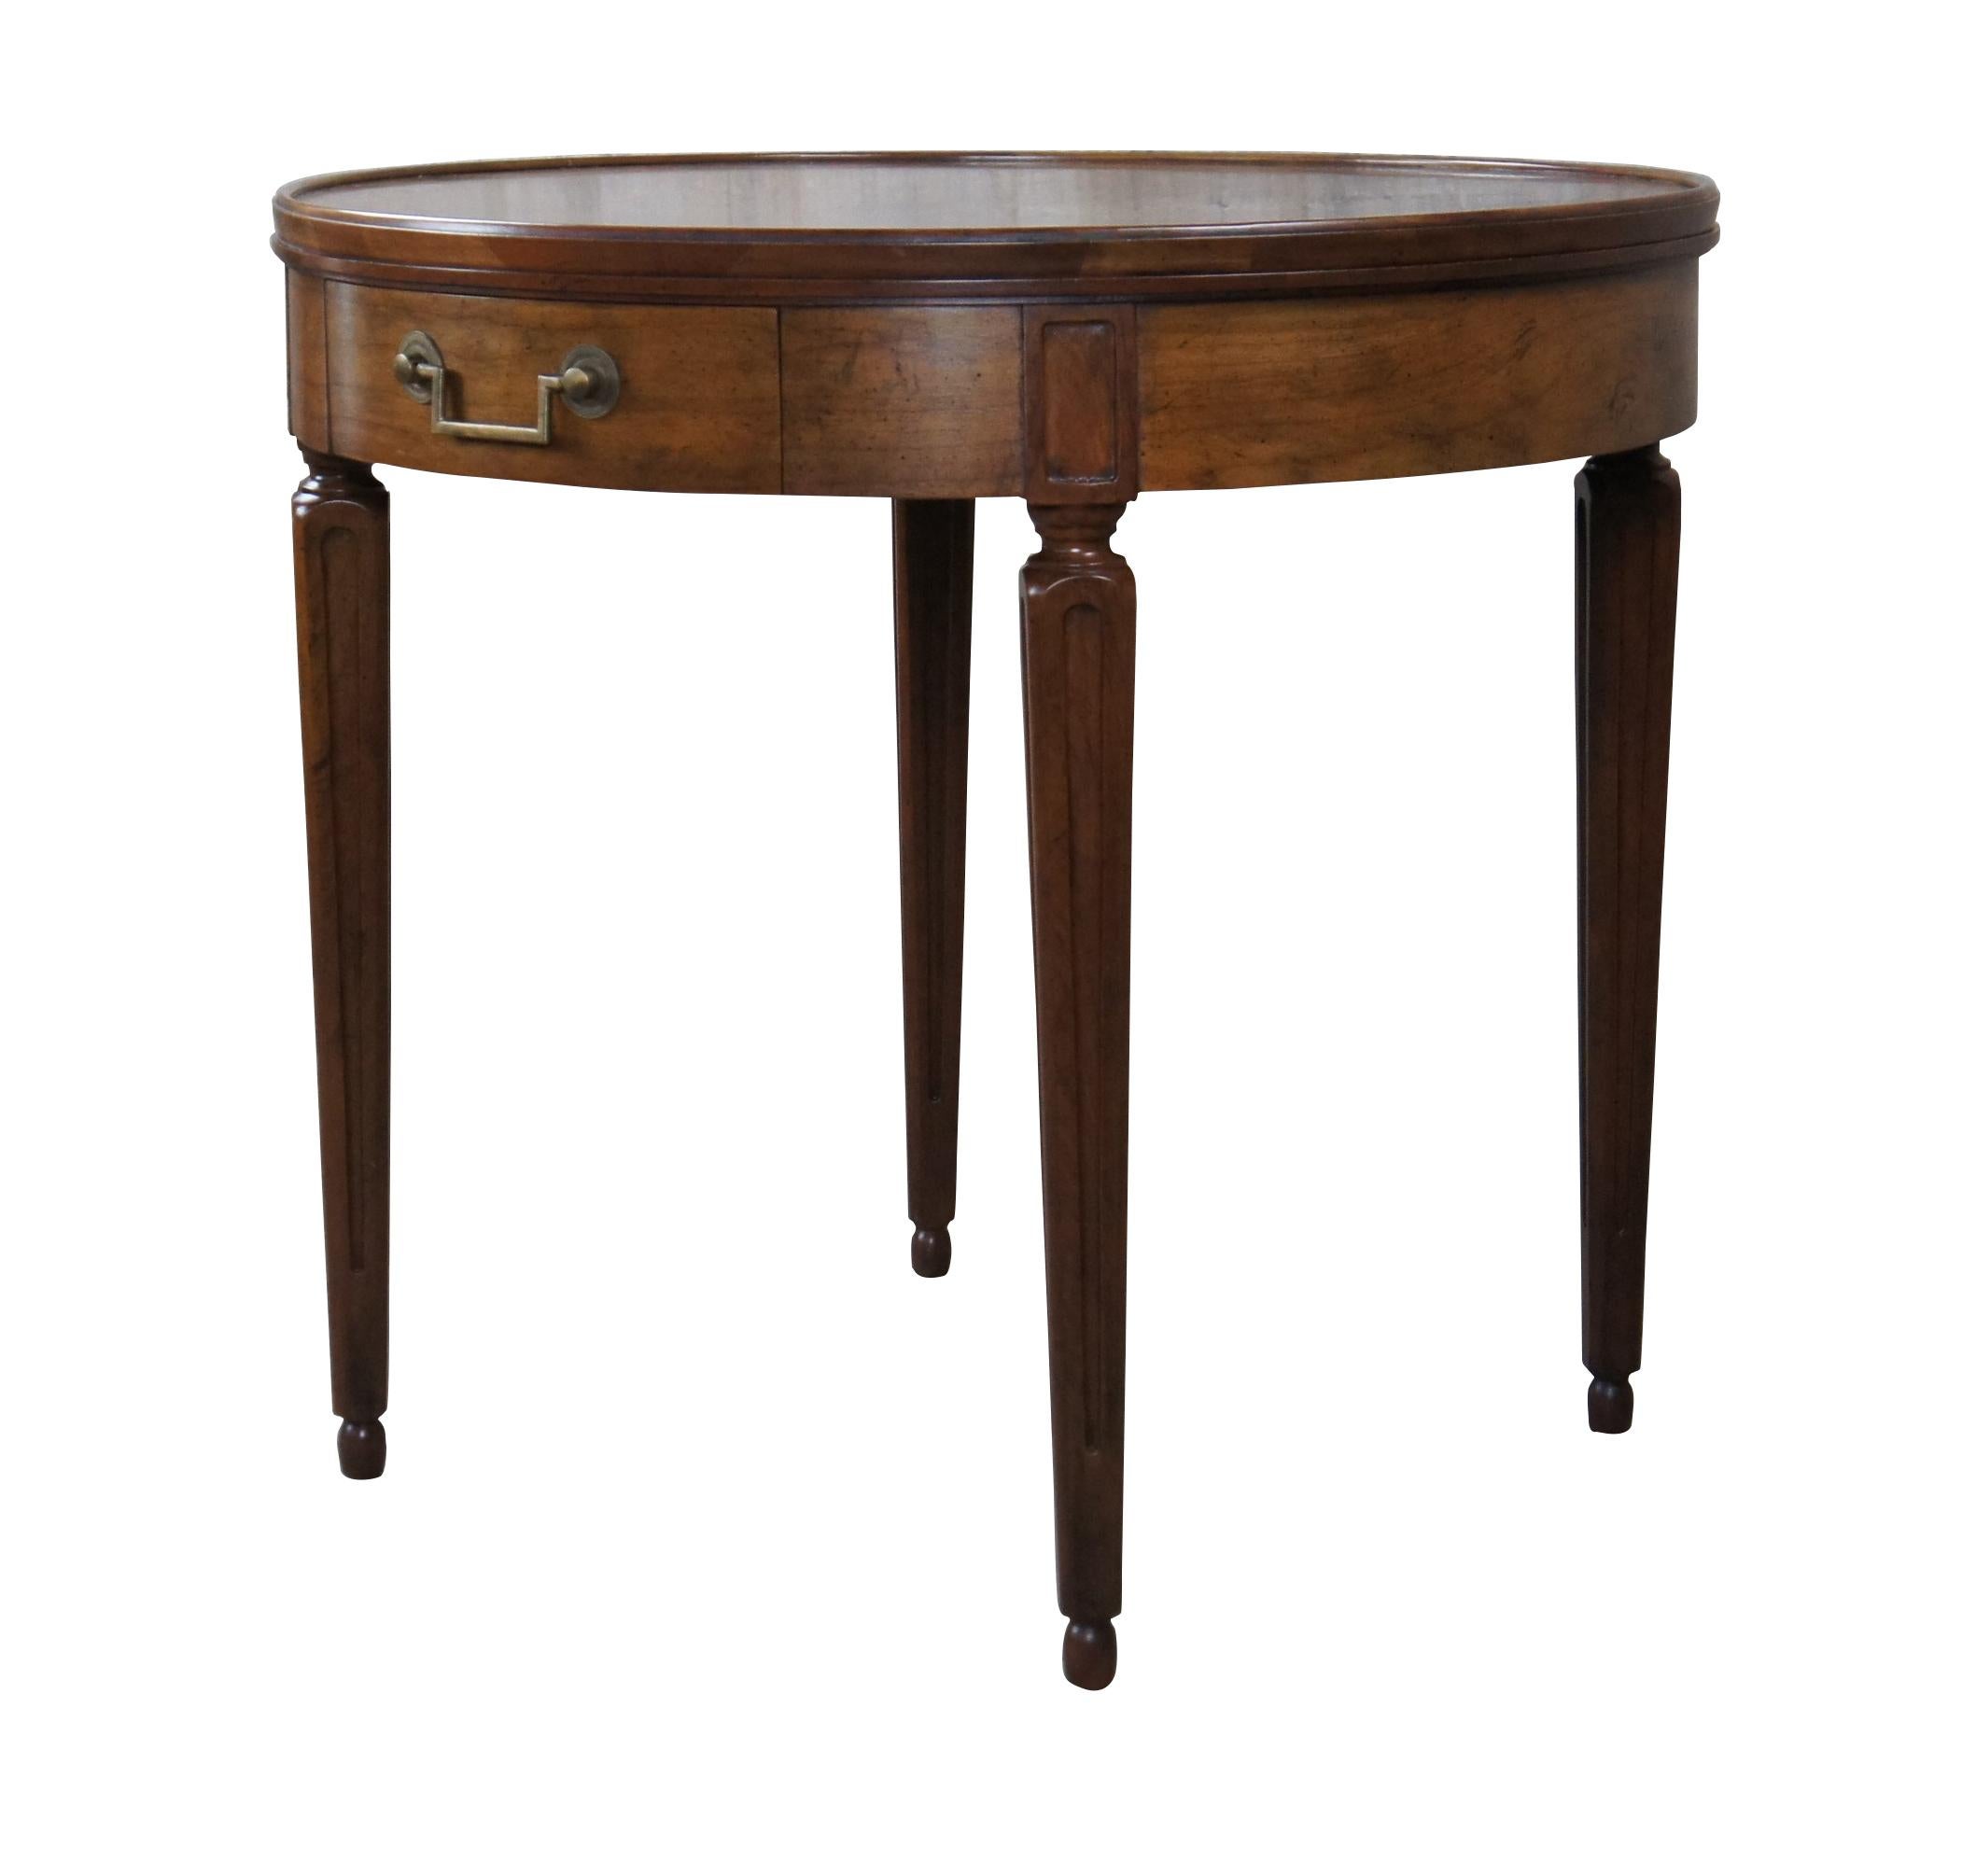 An impressive Baker Furniture Neoclassical inspired side table, circa 1980s. Features a round inset top made from walnut with olive ash burl banding. Includes one dovetailed drawer with brass hardware within the frieze set over square tapered legs